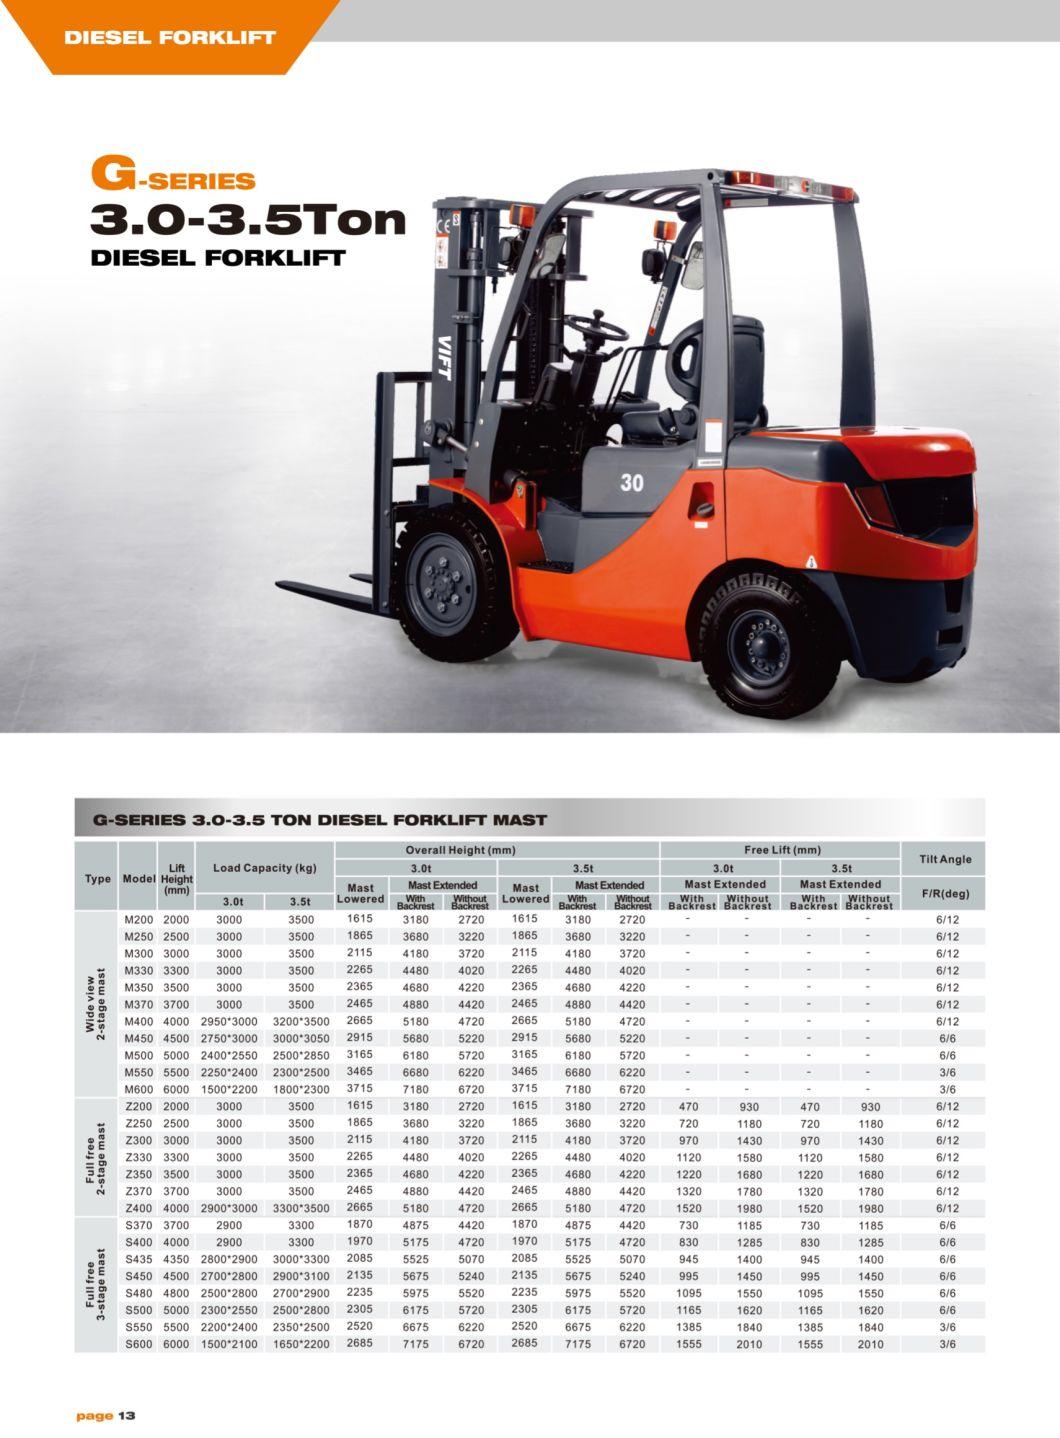 Beekeeping Equipment Ce &ISO Certification 2t Diesel Forklift Stacker with Isuzu Engine and Side Shift*Cabin*Solid Tire